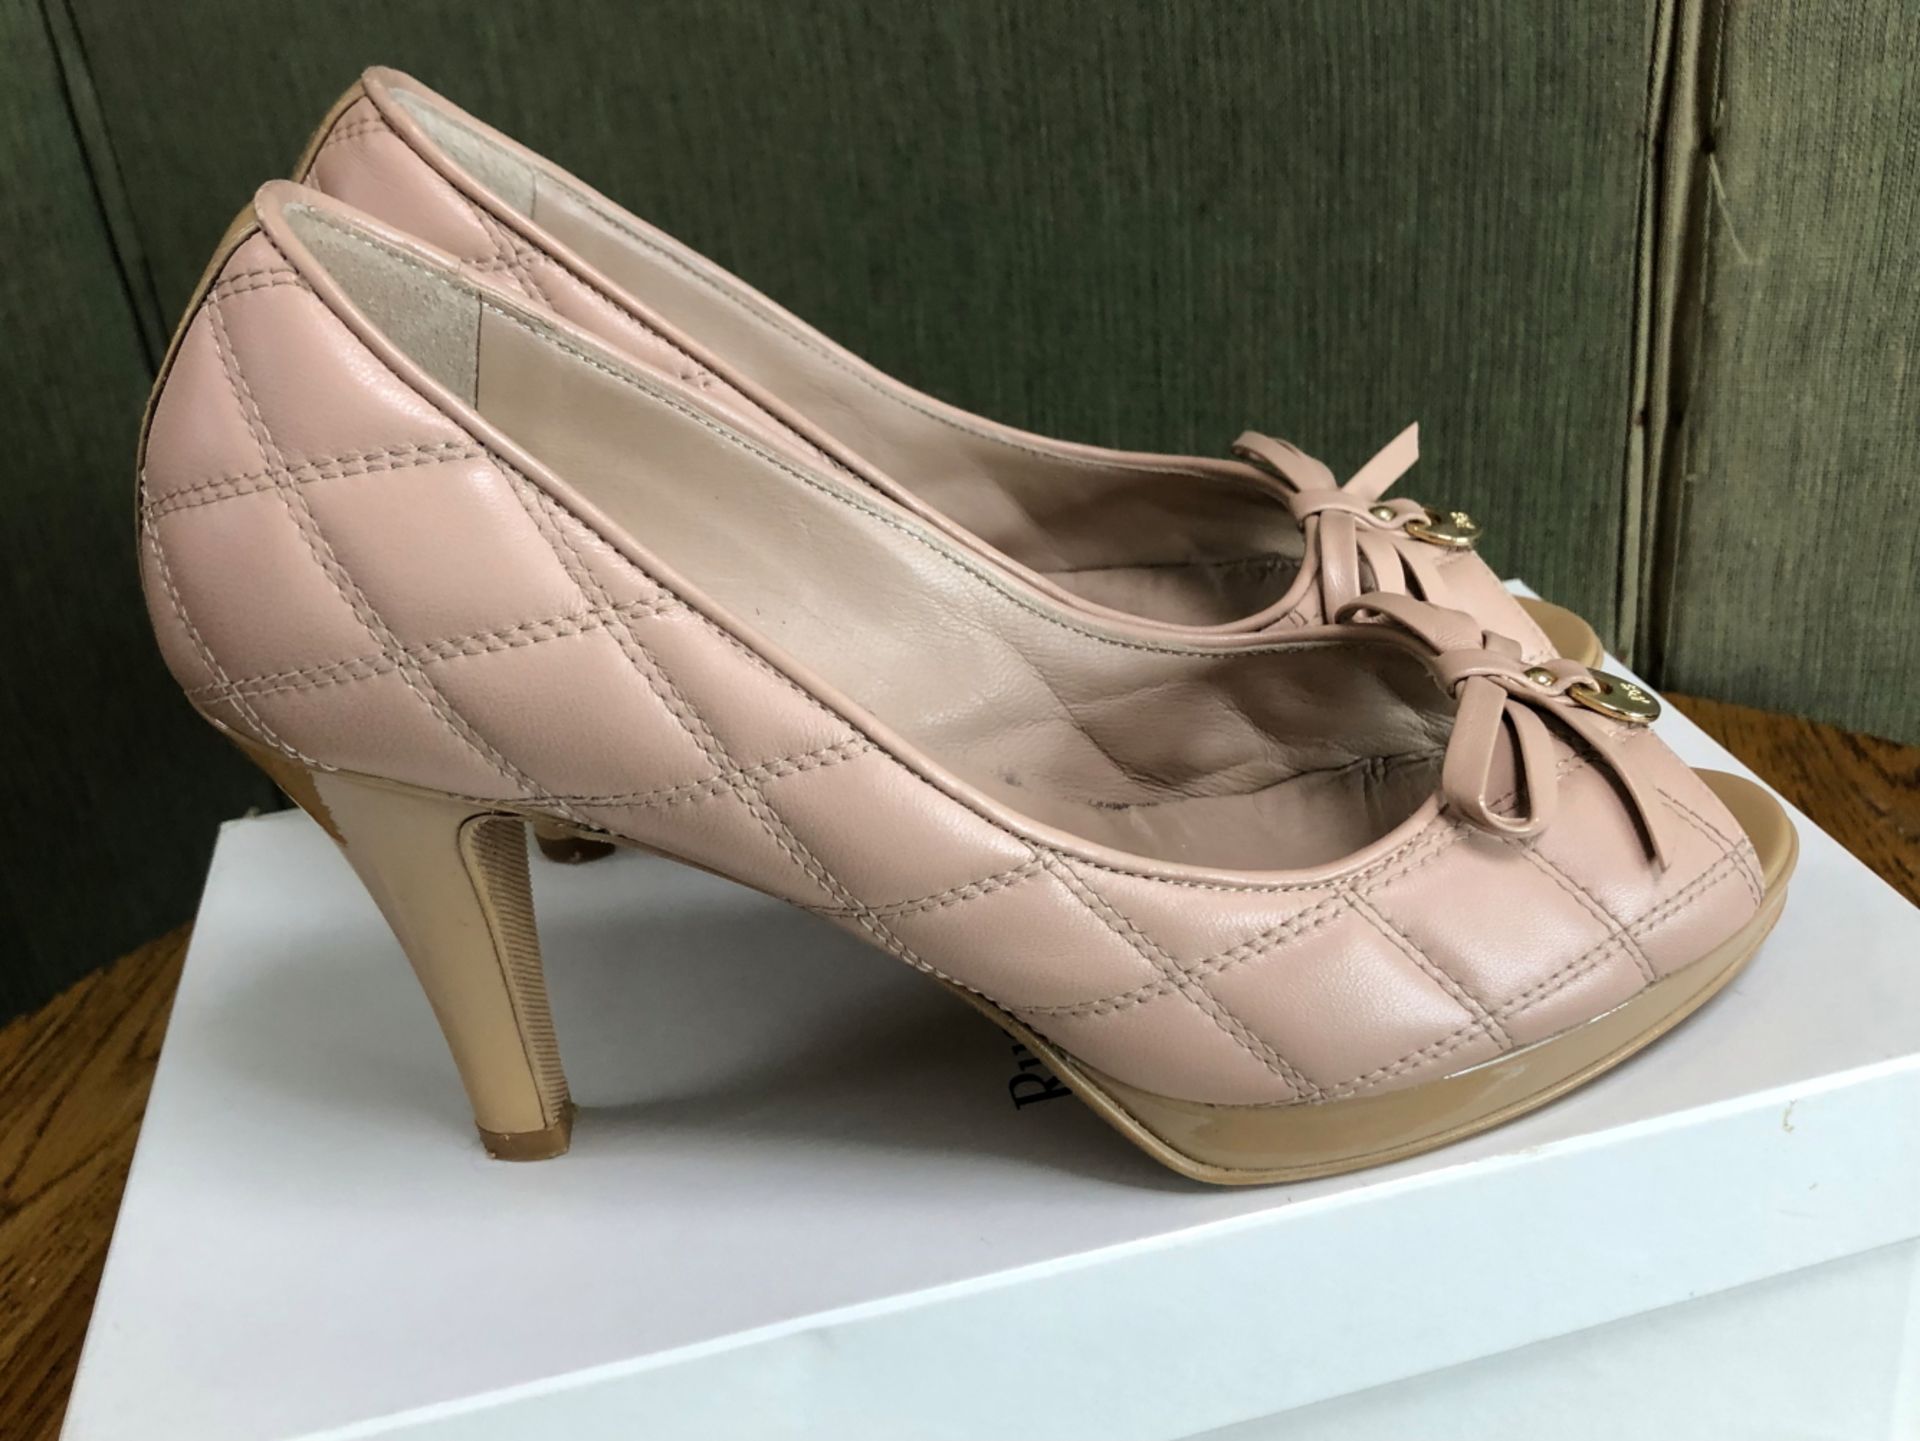 SHOES: A PAIR OF NUDE RUSSELL AND BROMLEY HIGH HEELED QUILTED PLATFORMS, EU SIZE 38.5 - Image 4 of 5